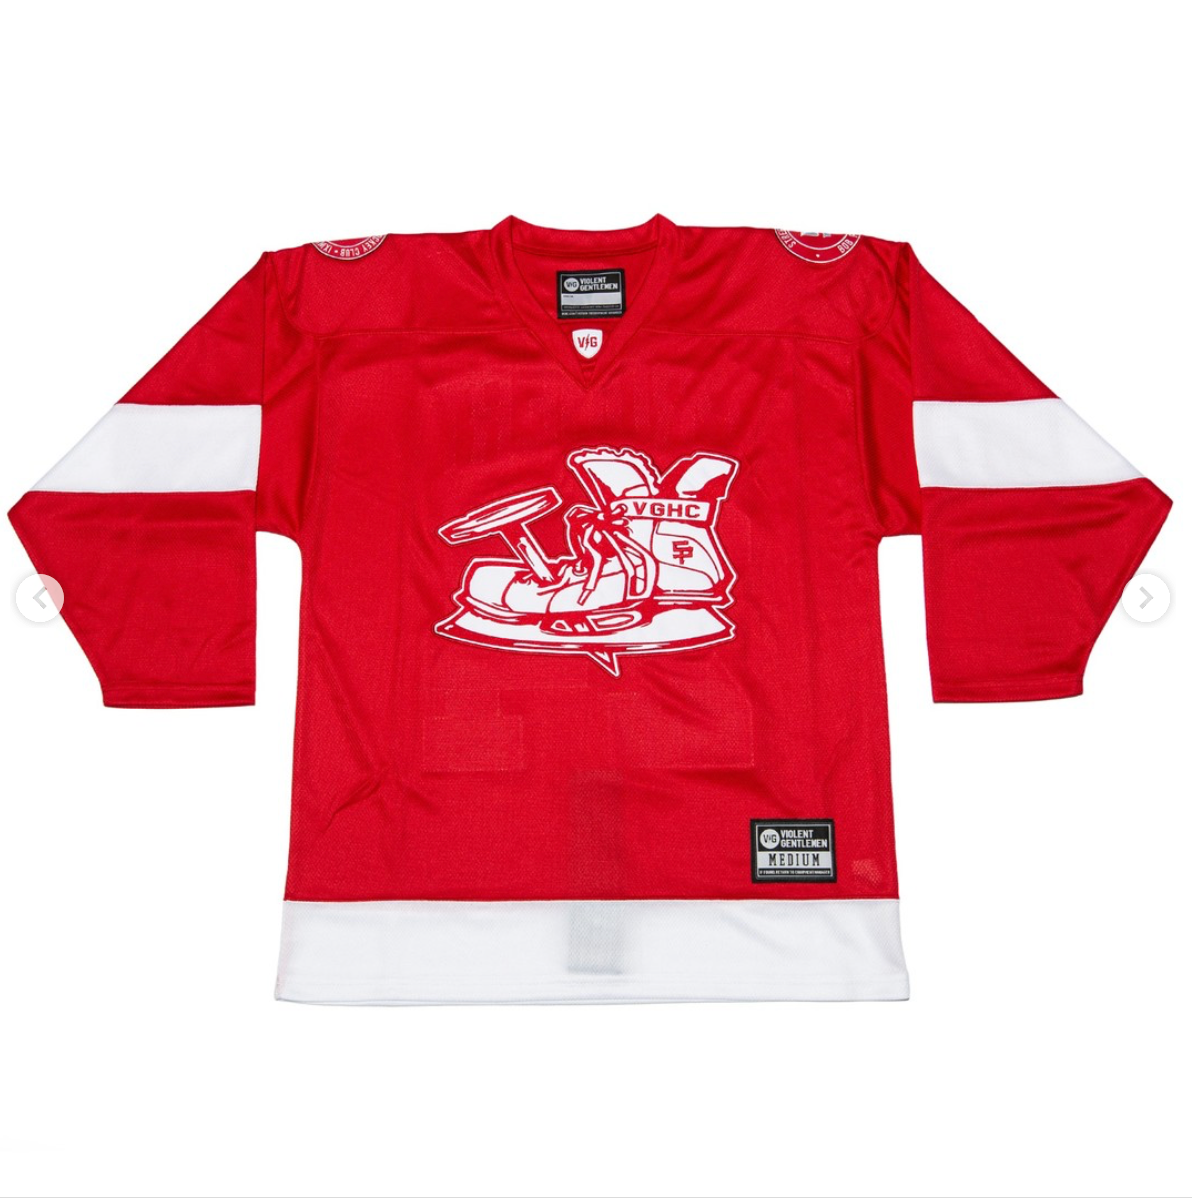 Archives: Probert VG Jersey (Red)